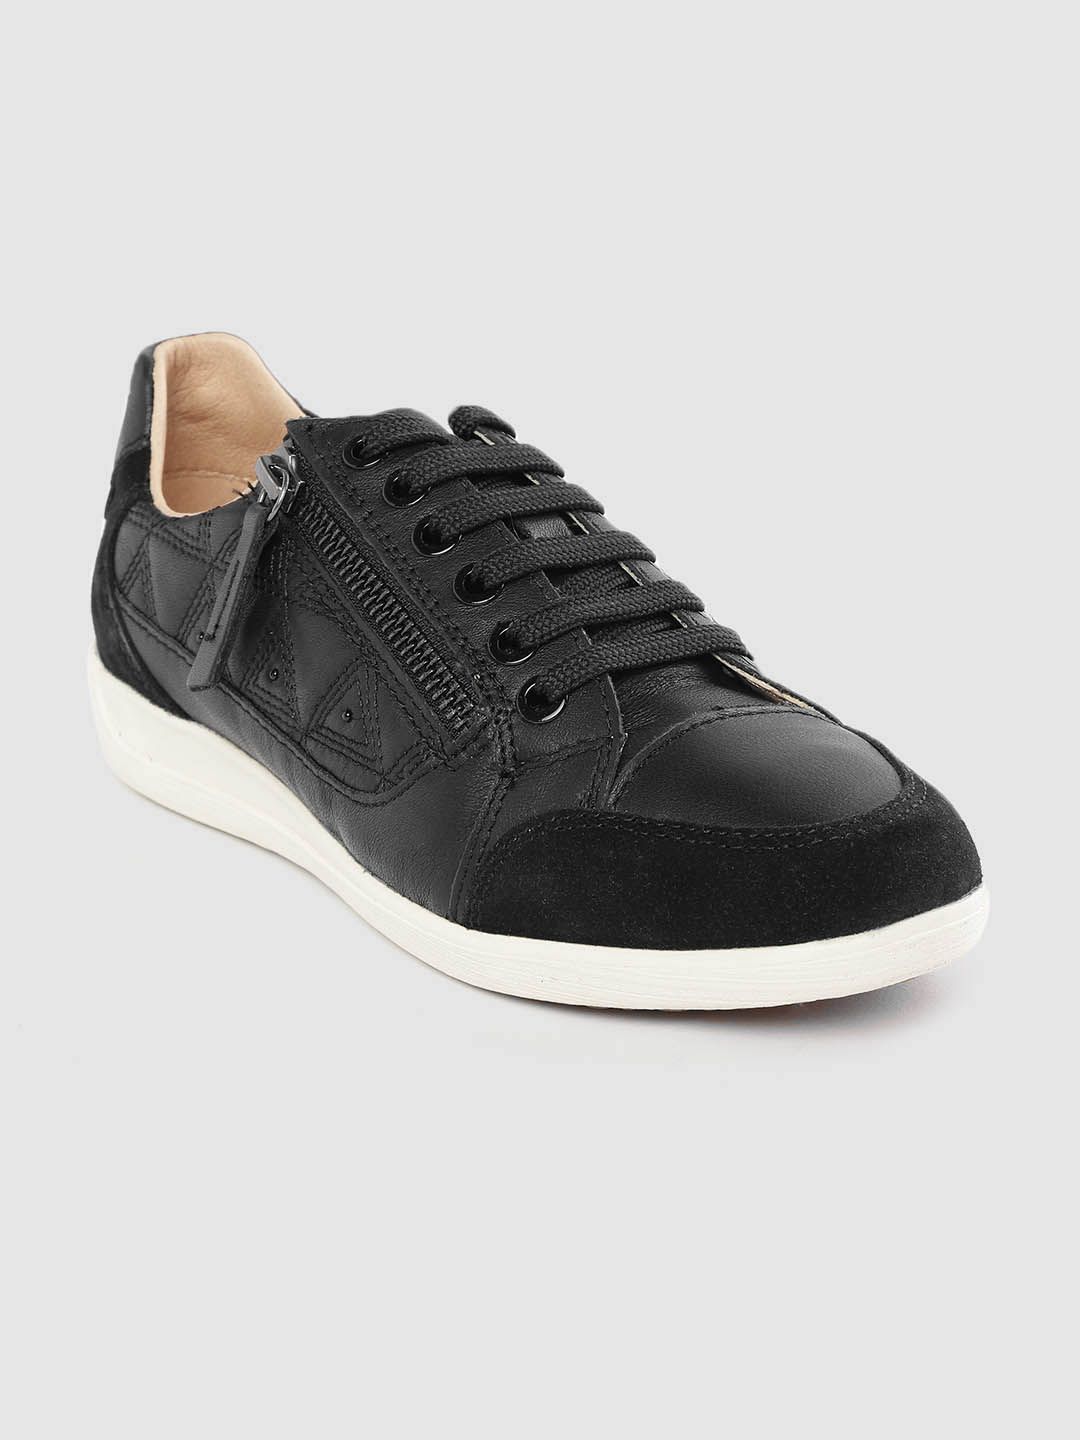 Geox Women Black Woven Design Leather Sneakers Price in India